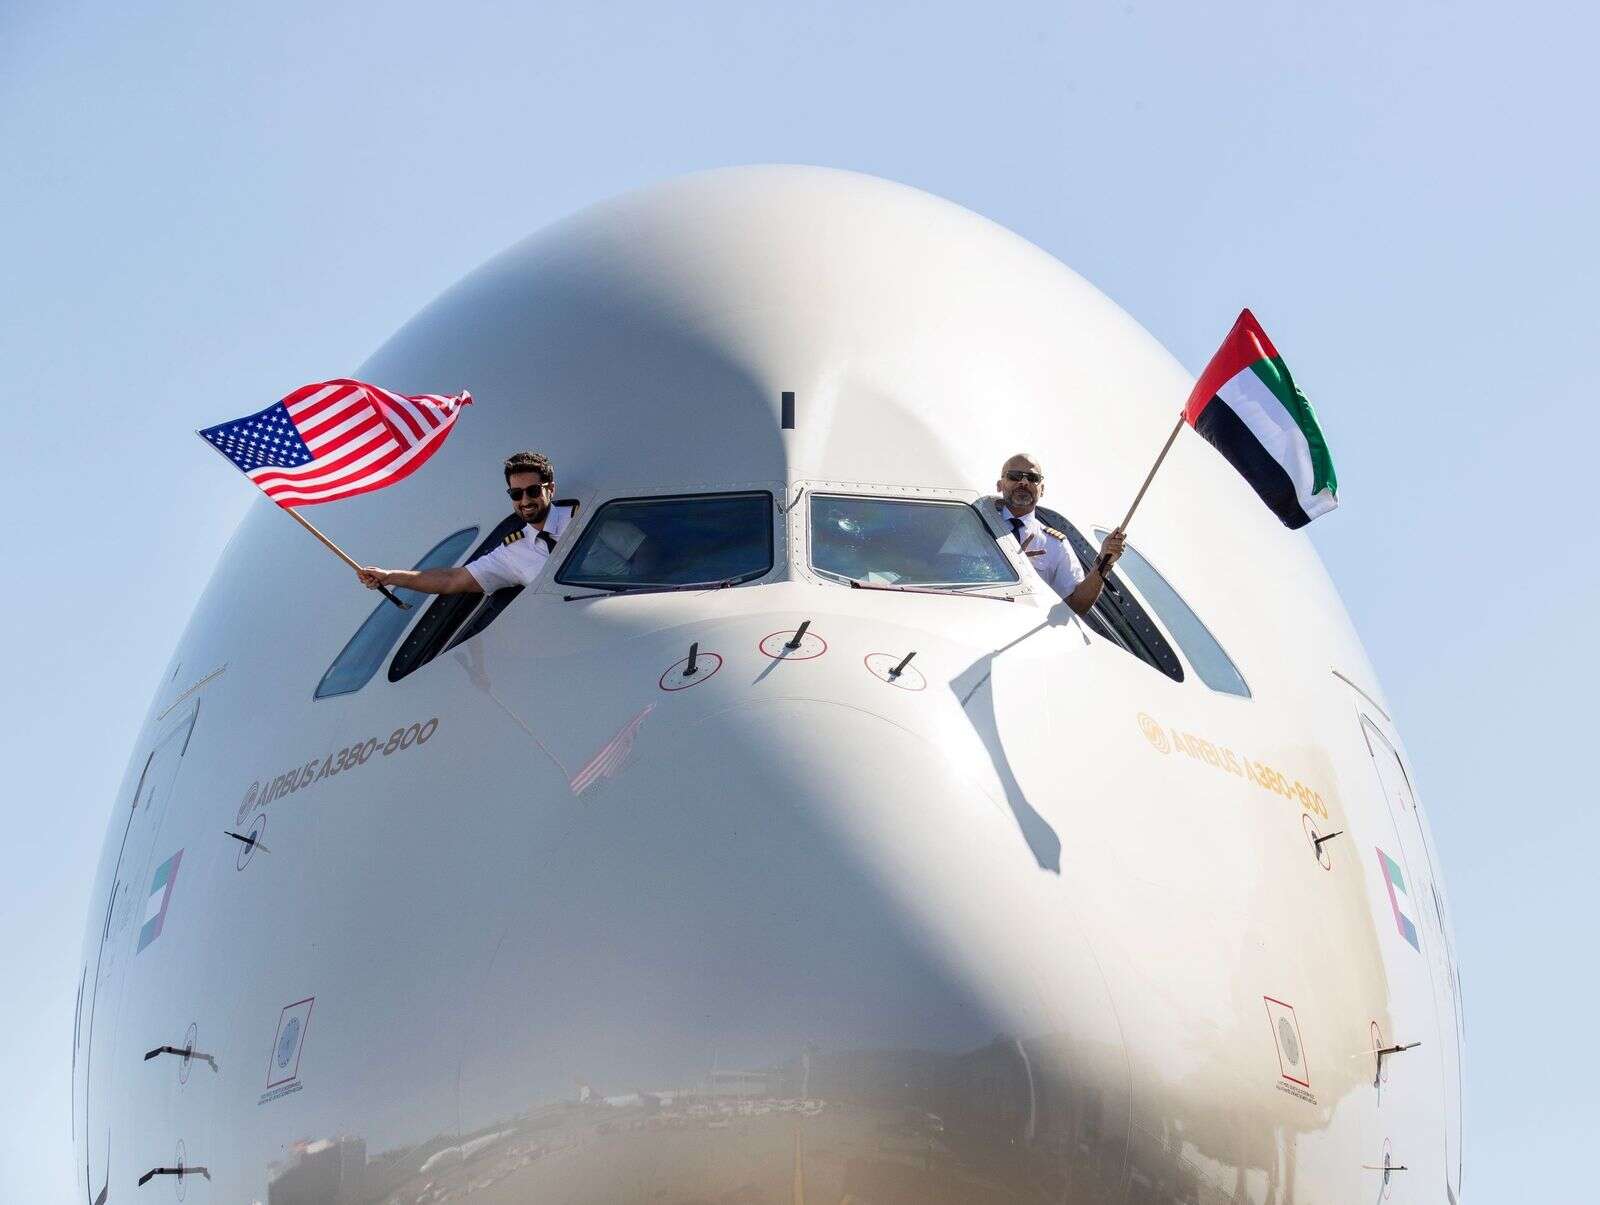 etihad launches airbus a380 on abu dhabi-new york route